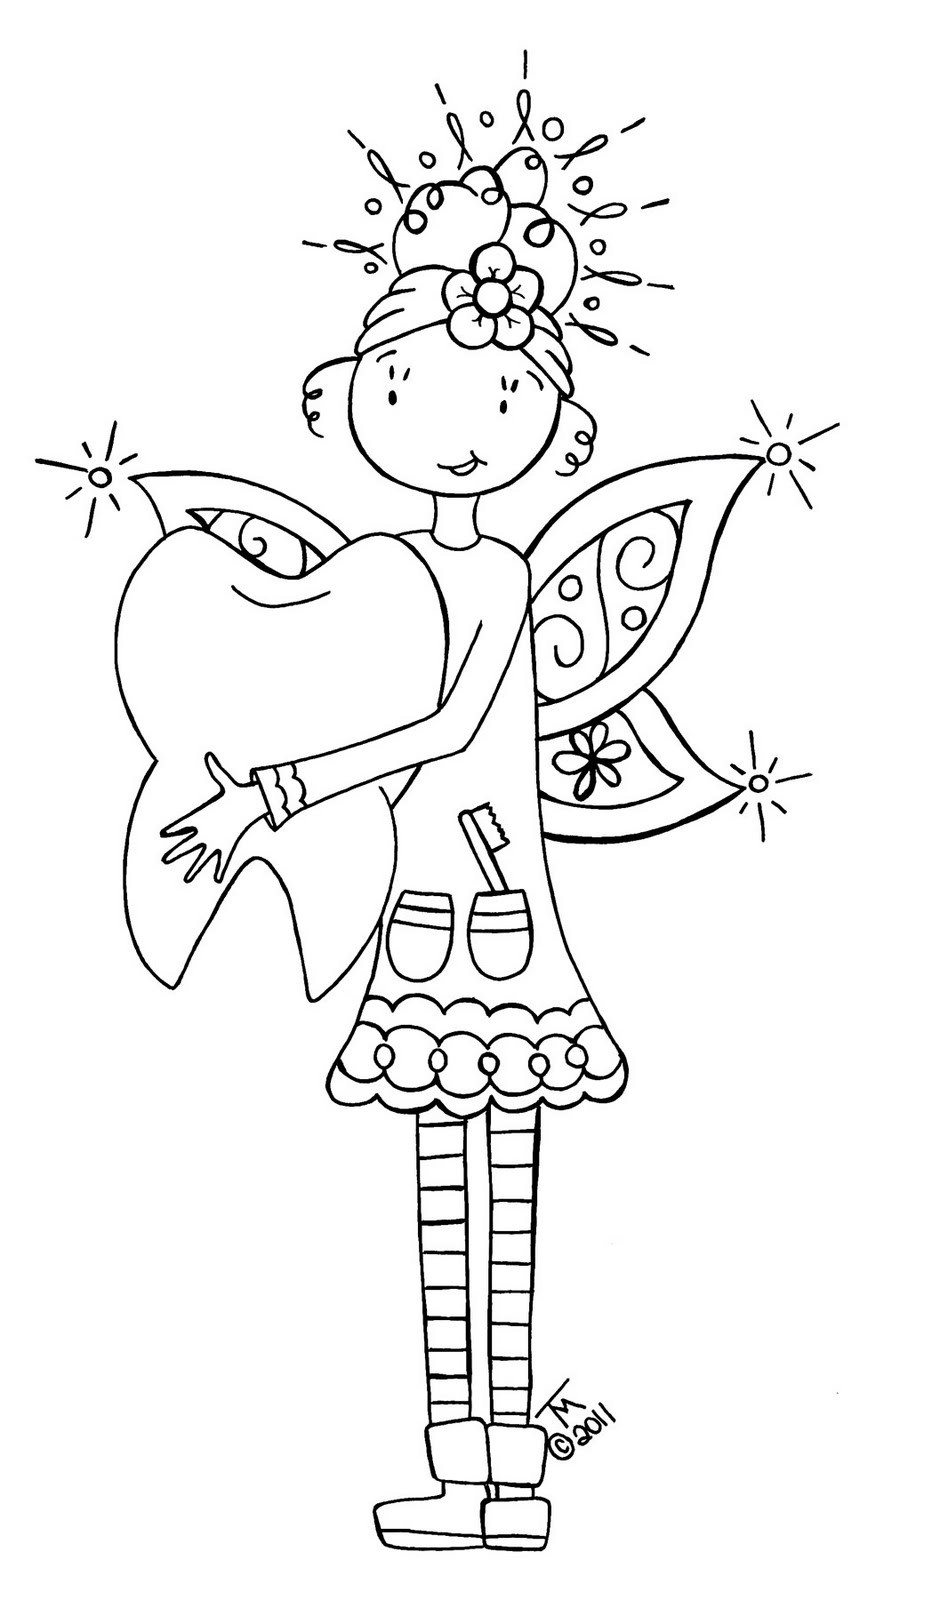 Tooth Coloring Pages Printable
 The Stamping Boutique 4 24 11 5 1 11